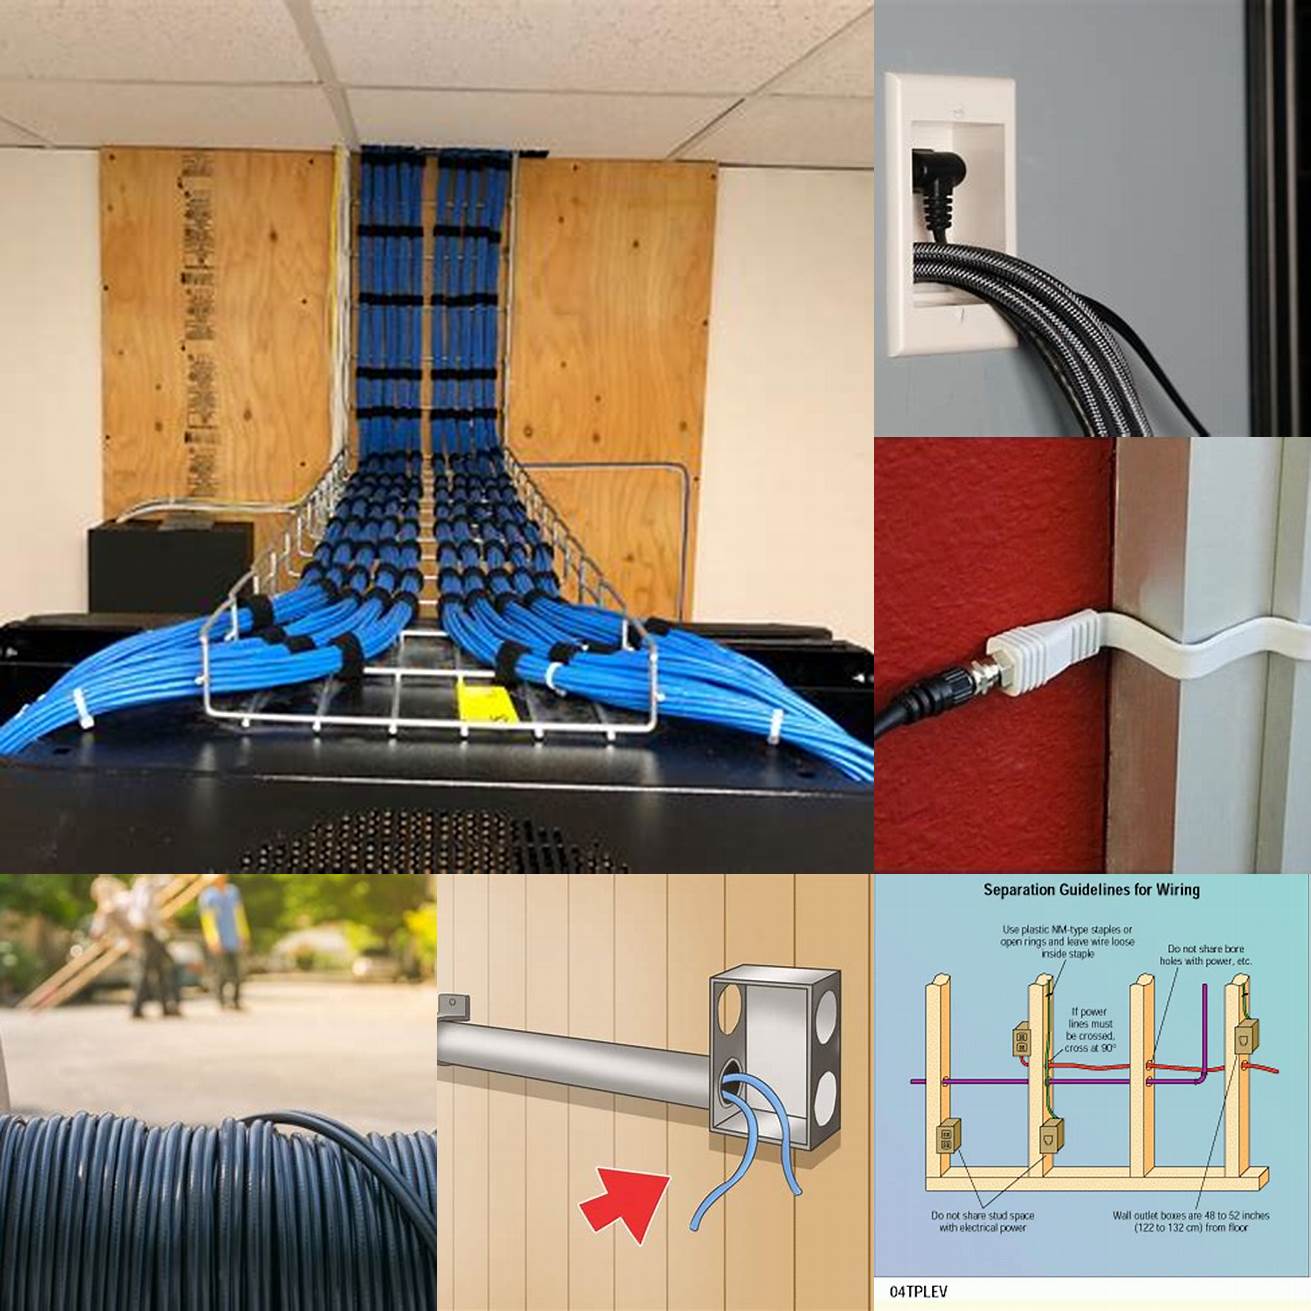 Avoid running cables near sources of interference